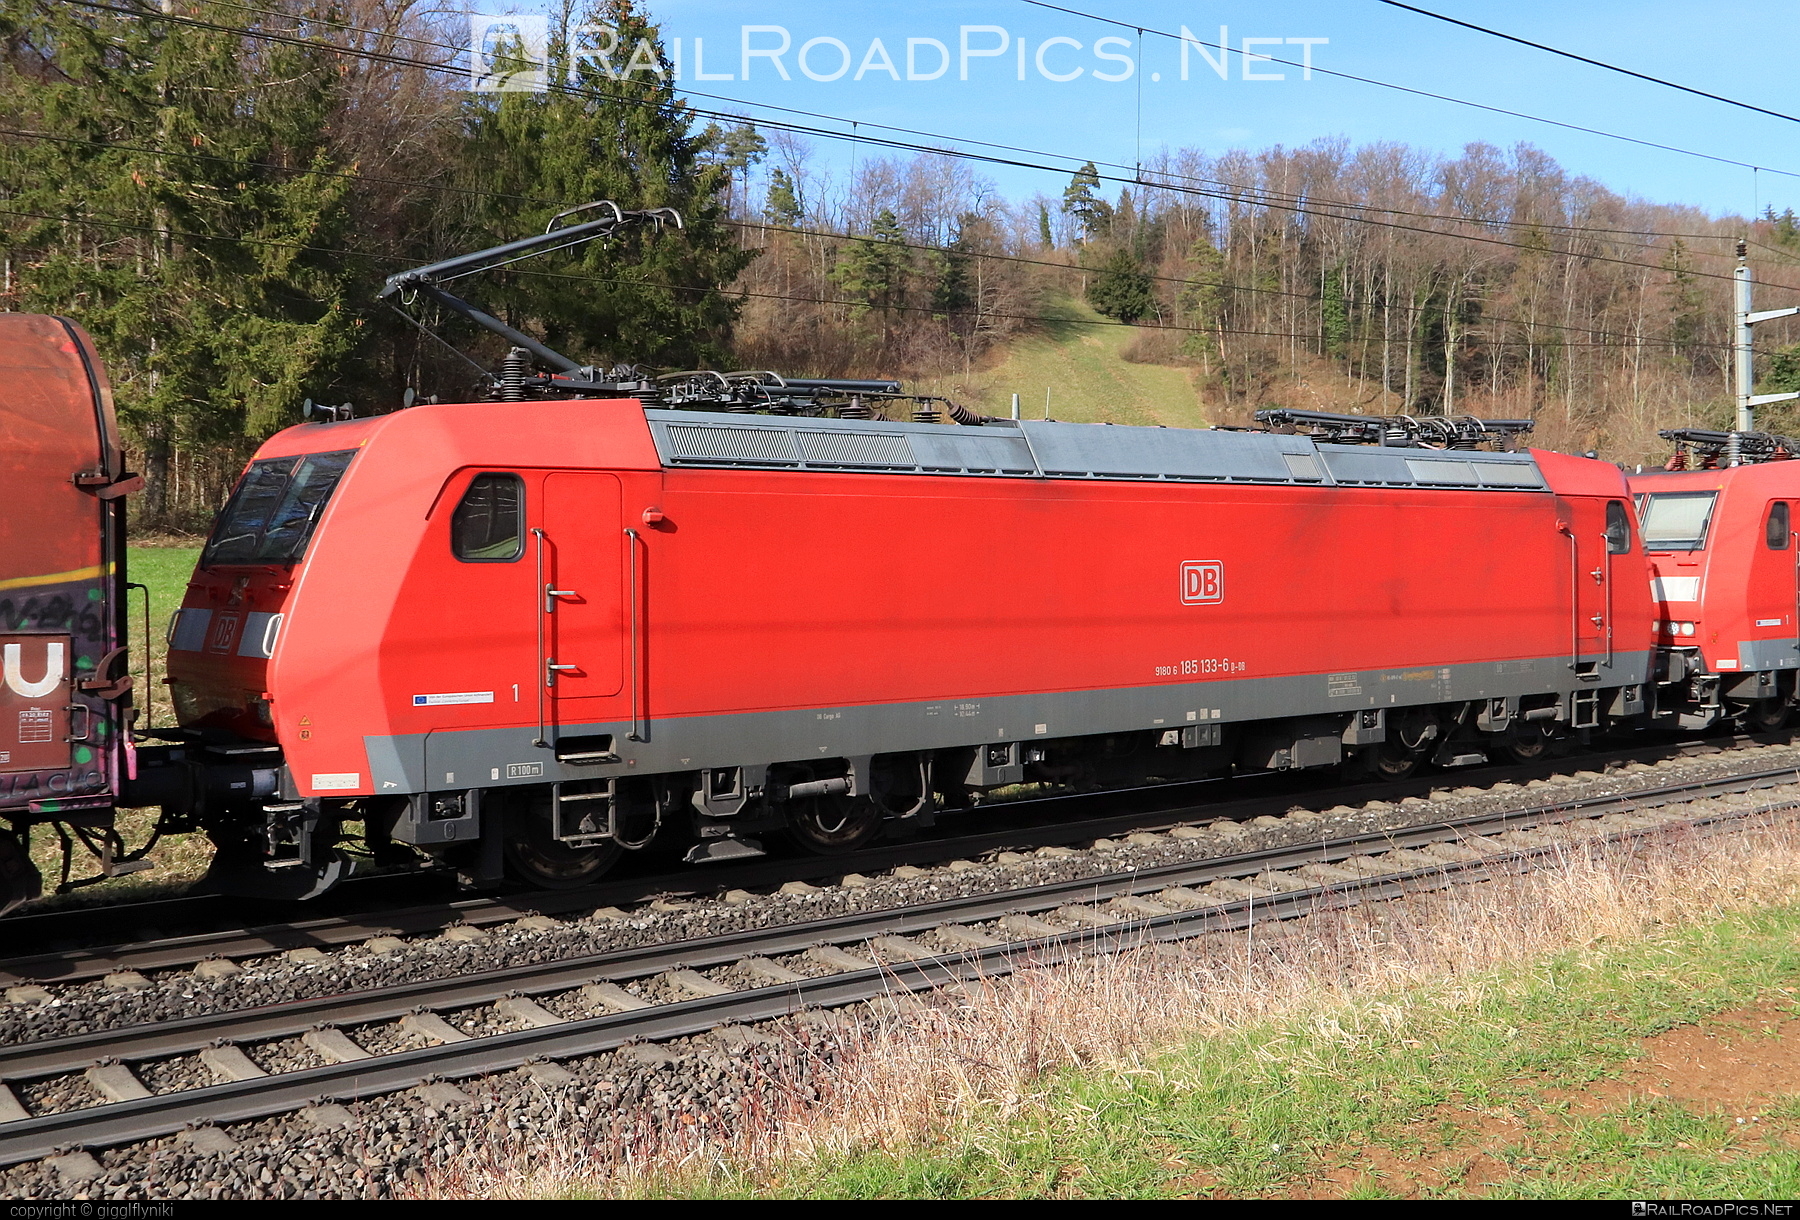 Bombardier TRAXX F140 AC1 - 185 133-6 operated by DB Cargo AG #bombardier #bombardiertraxx #db #dbcargo #dbcargoag #deutschebahn #traxx #traxxf140 #traxxf140ac #traxxf140ac1